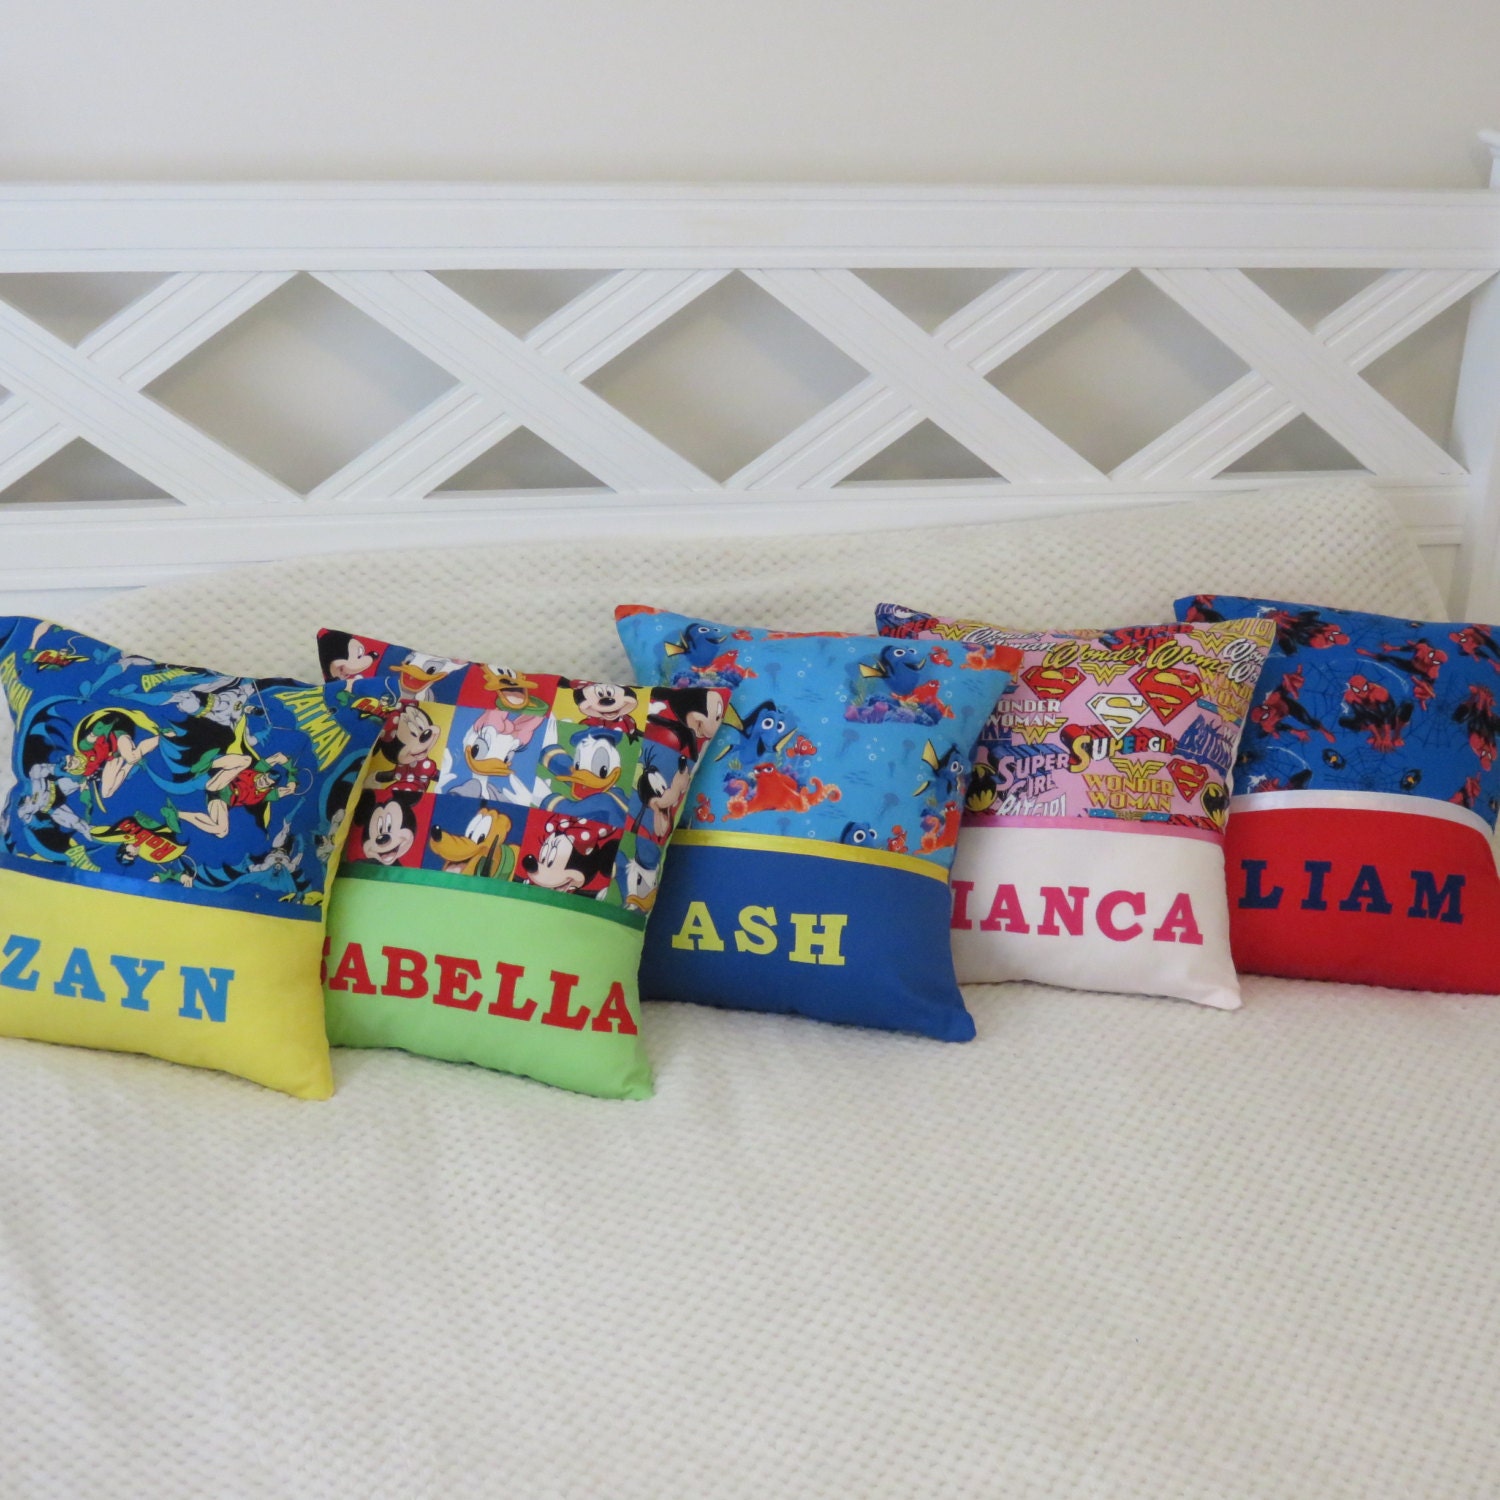 GIFT KINDY PILLOW MARVEL AVENGERS Child's Personalised Name Cushion Cover 